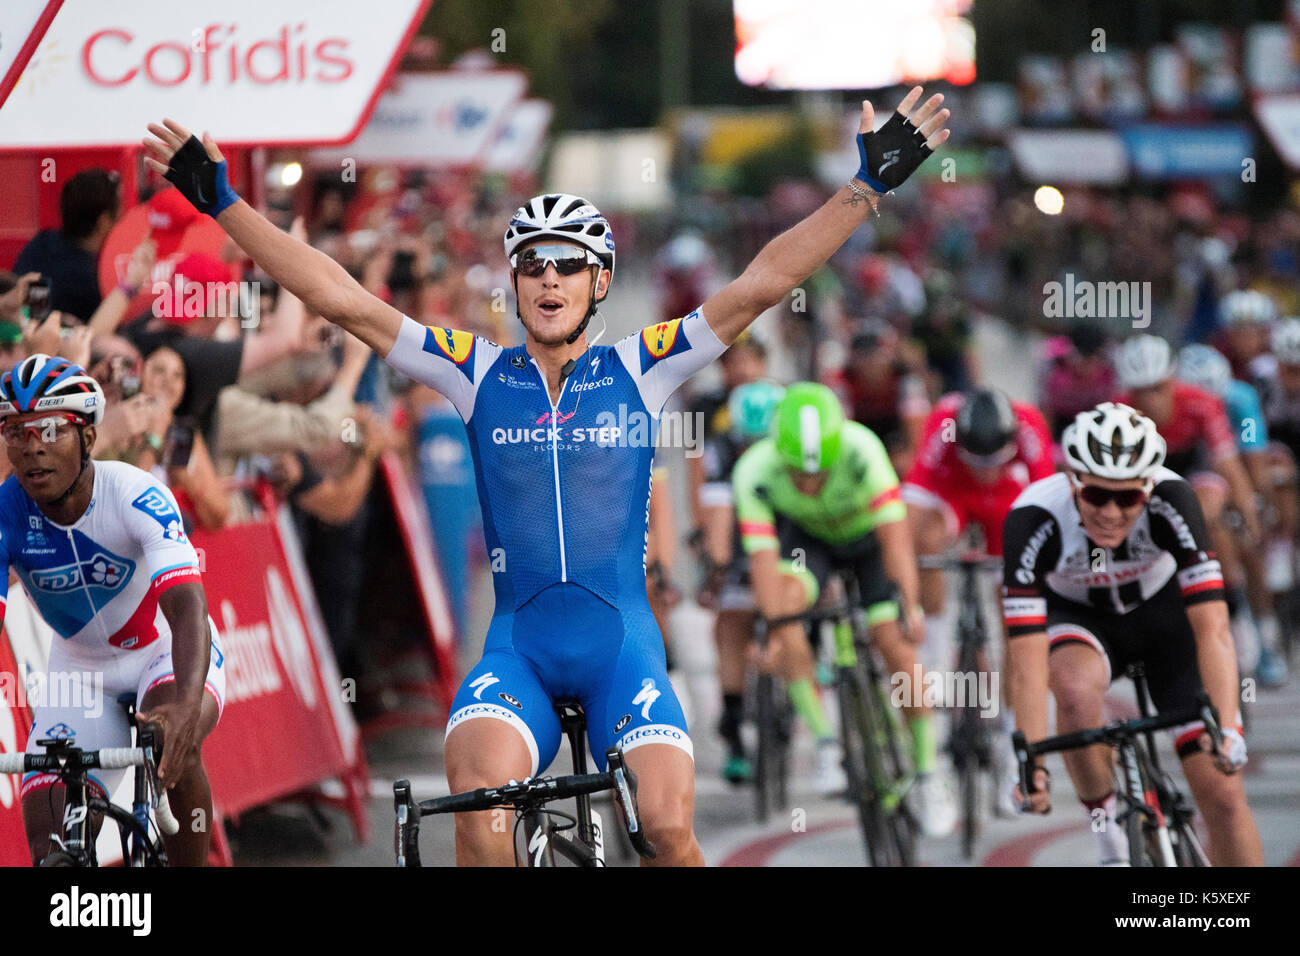 Madrid, Spain. 10th September, 2017. Winner celebrates his victory rides  during the stage 21 of Tour of Spain (Vuelta a España) between Madrid and Madrid on September 10, 2017 in Madrid, Spain. ©David Gato/Alamy Live News Stock Photo